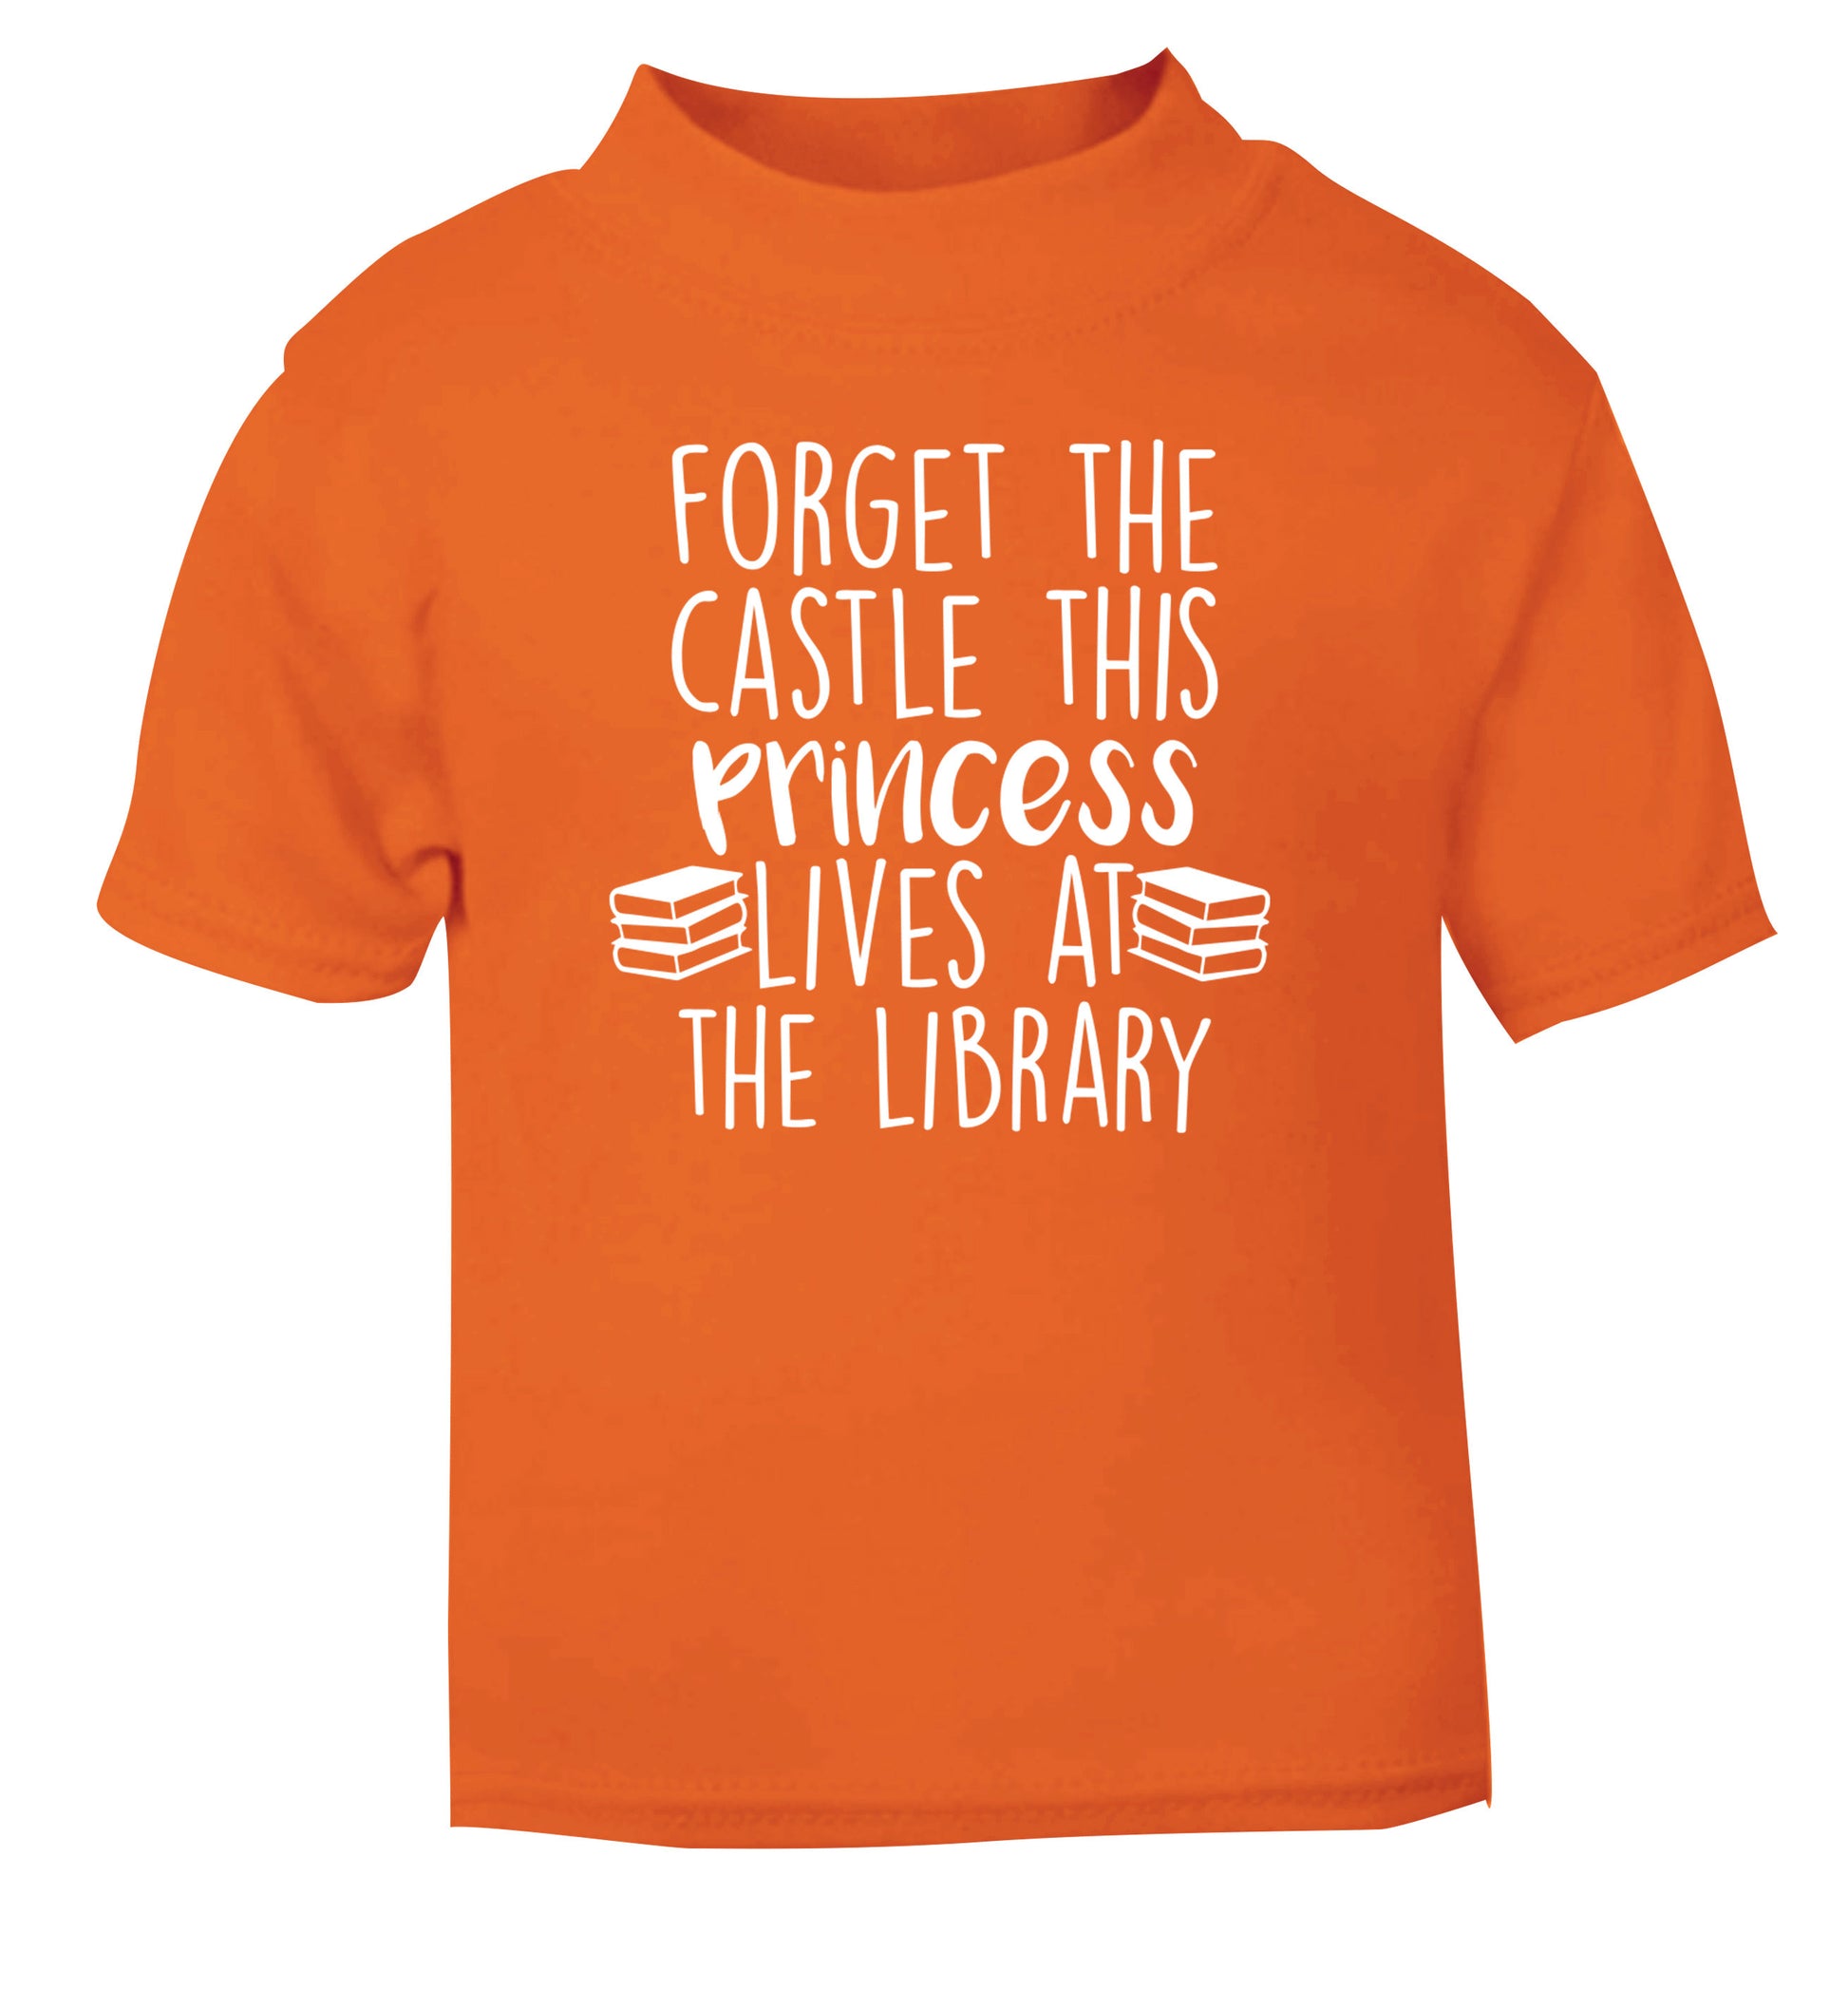 Forget the castle this princess lives at the library orange Baby Toddler Tshirt 2 Years